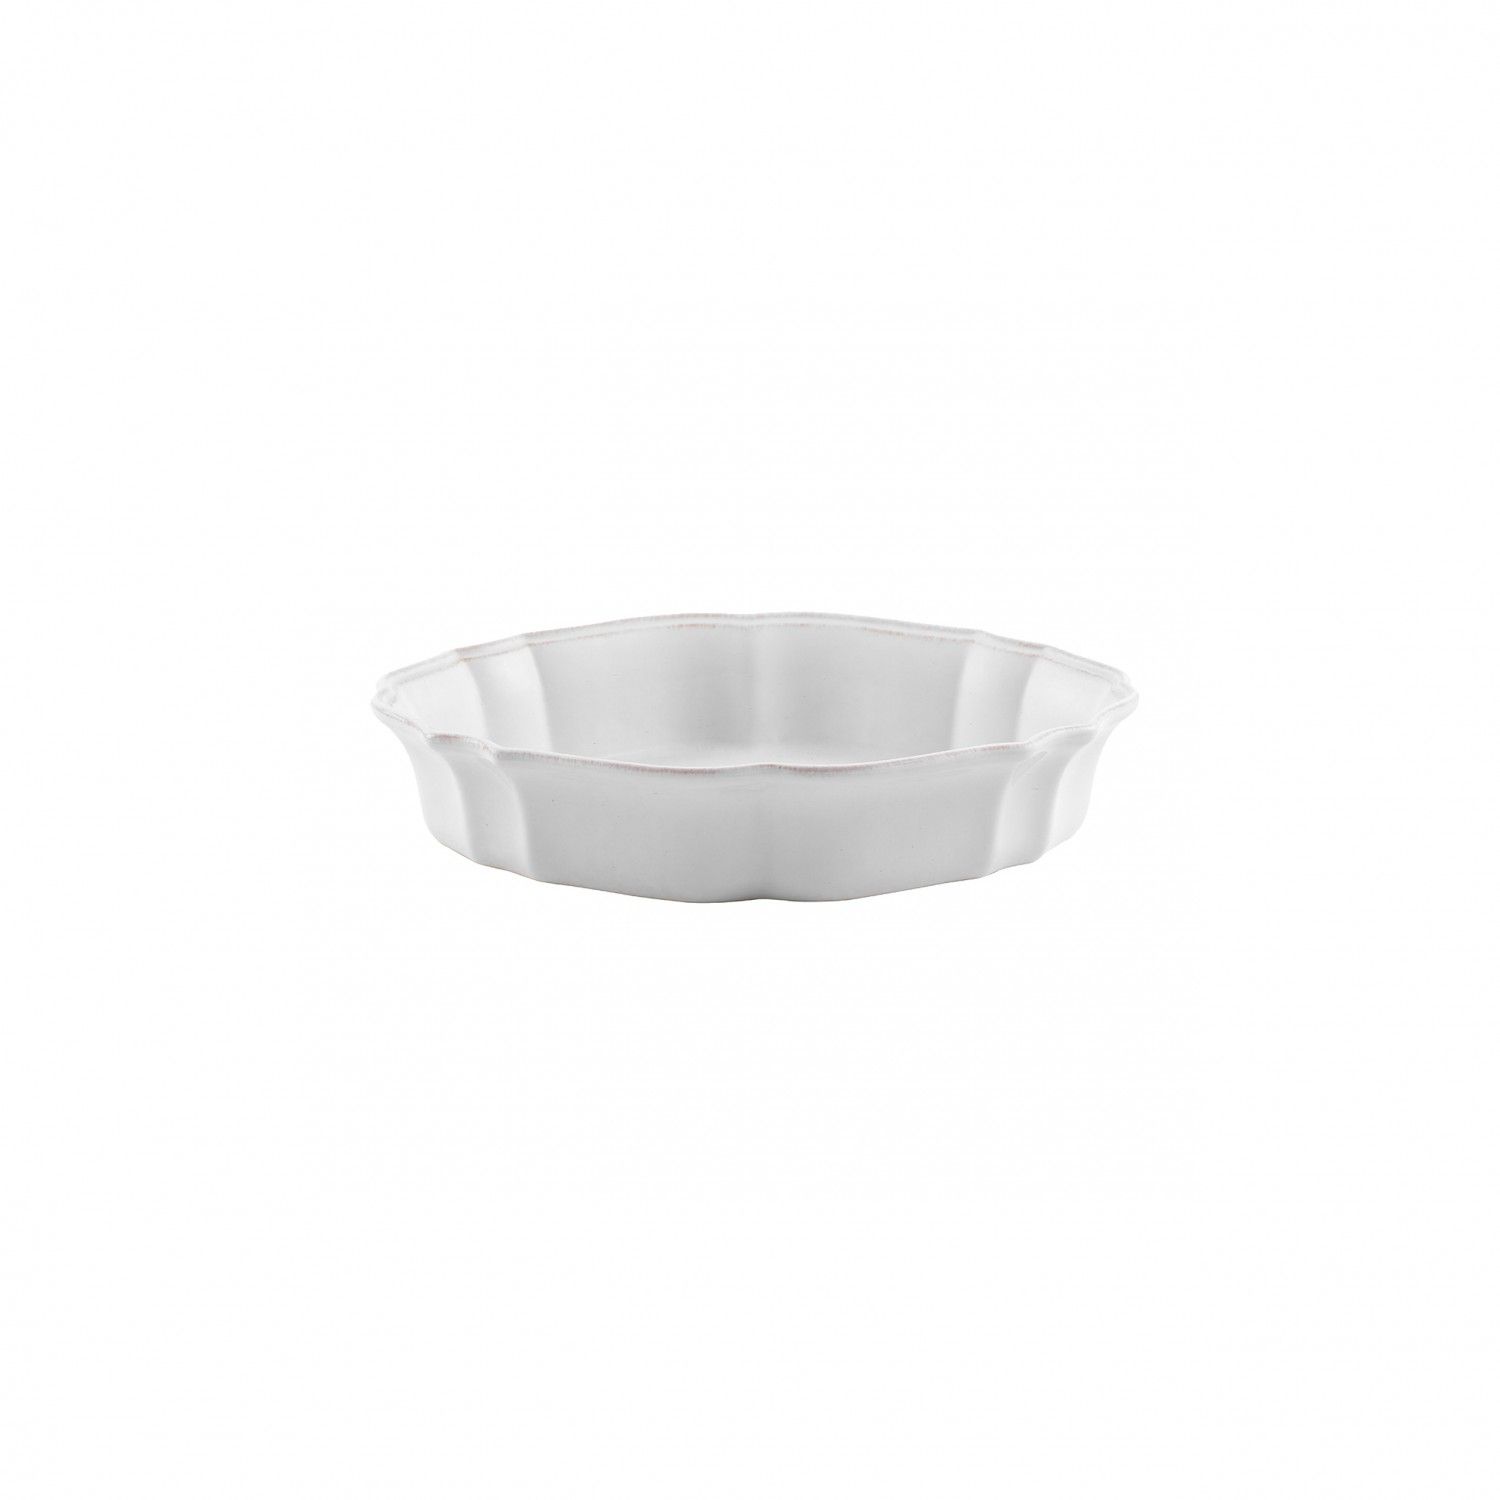 Impressions White Oval Baker Small 25.4cm Gift